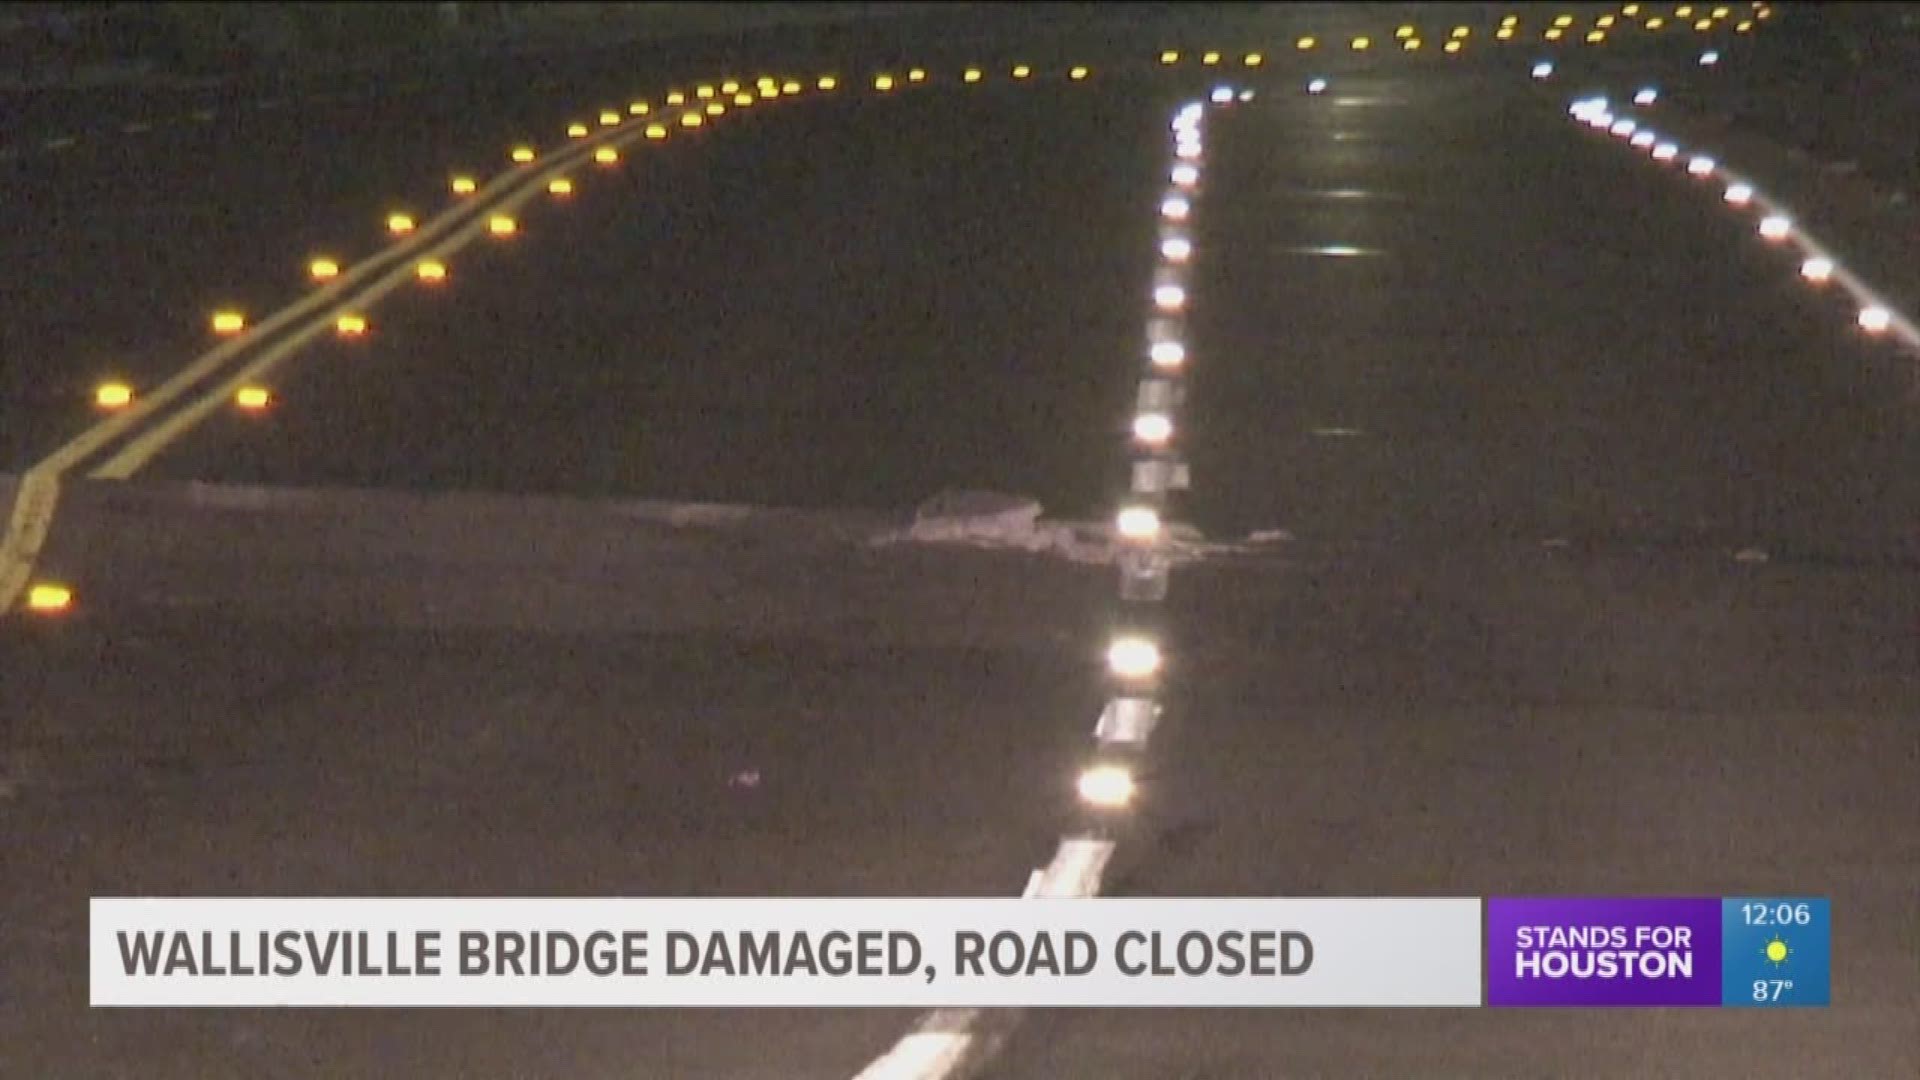 A closer look at the problem shows the roadway on the bridge over Greens Bayou is beginning to buckle up, and it's creating unsafe driving conditions.